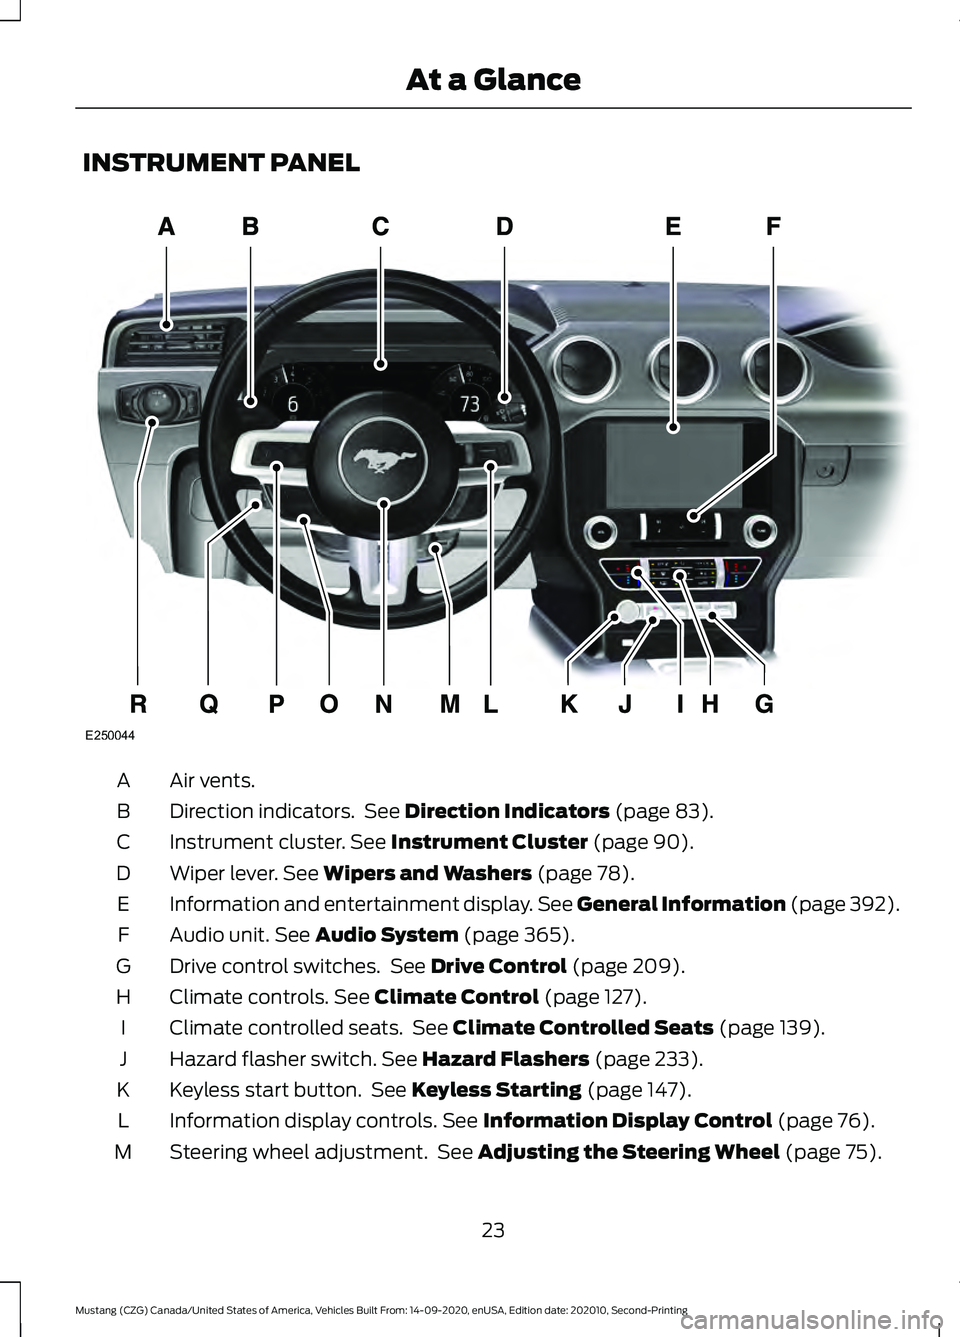 FORD MUSTANG 2021  Owners Manual INSTRUMENT PANEL
Air vents.
A
Direction indicators.  See Direction Indicators (page 83).
B
Instrument cluster.
 See Instrument Cluster (page 90).
C
Wiper lever.
 See Wipers and Washers (page 78).
D
In